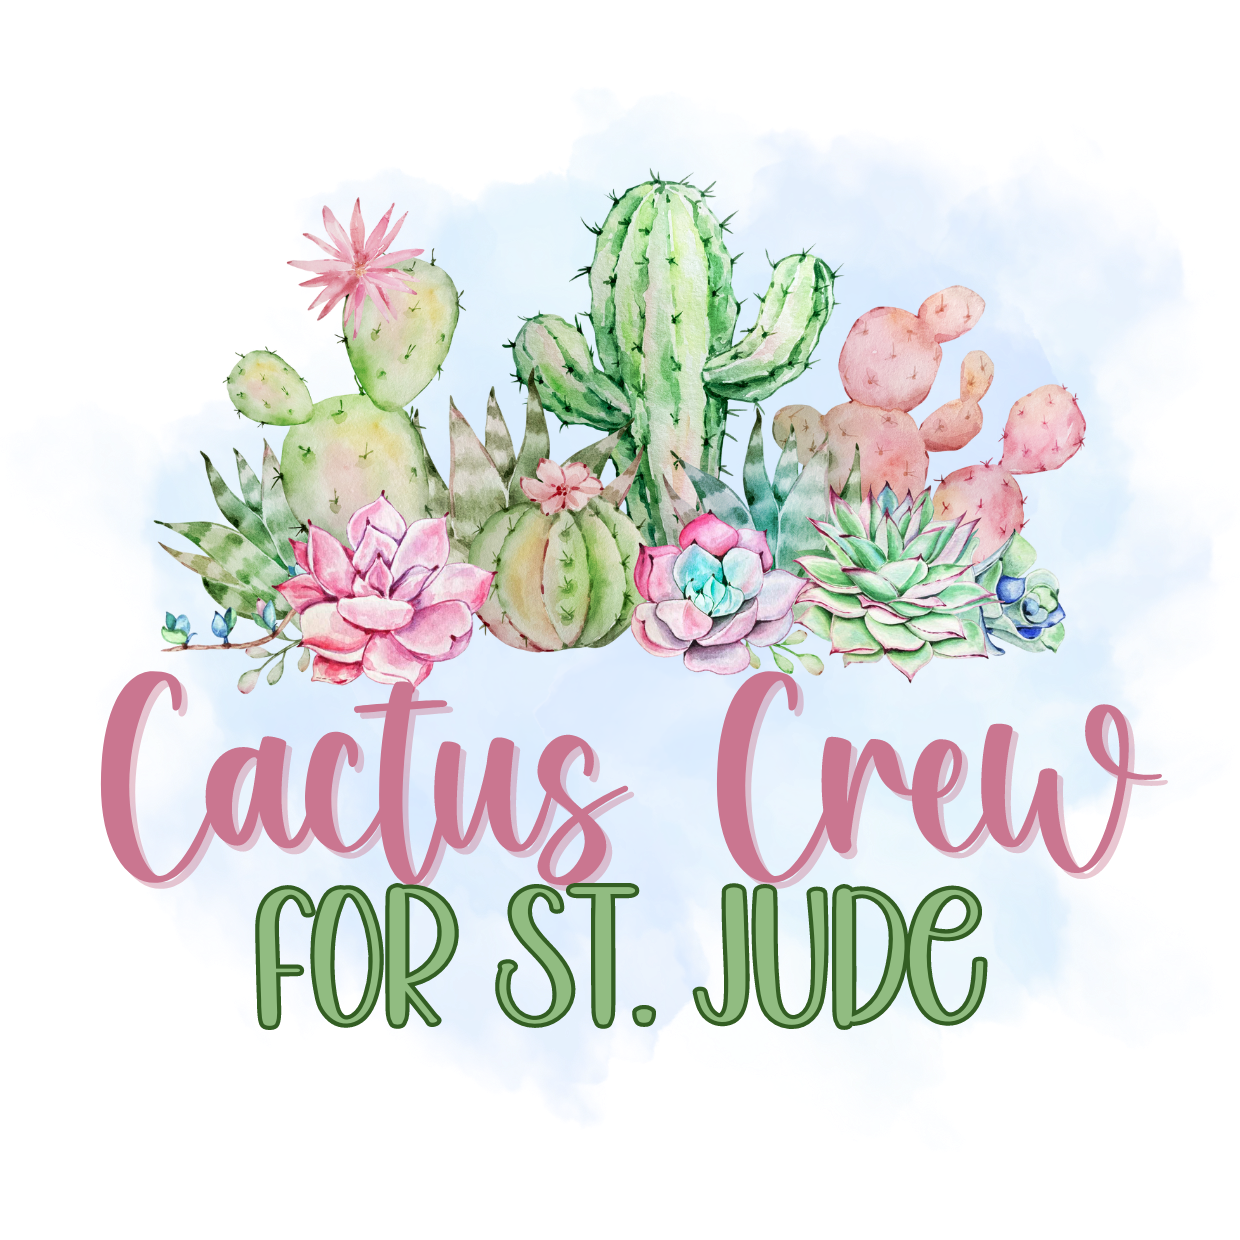 Cactus Crew for St Jude December 28th LAST DAY